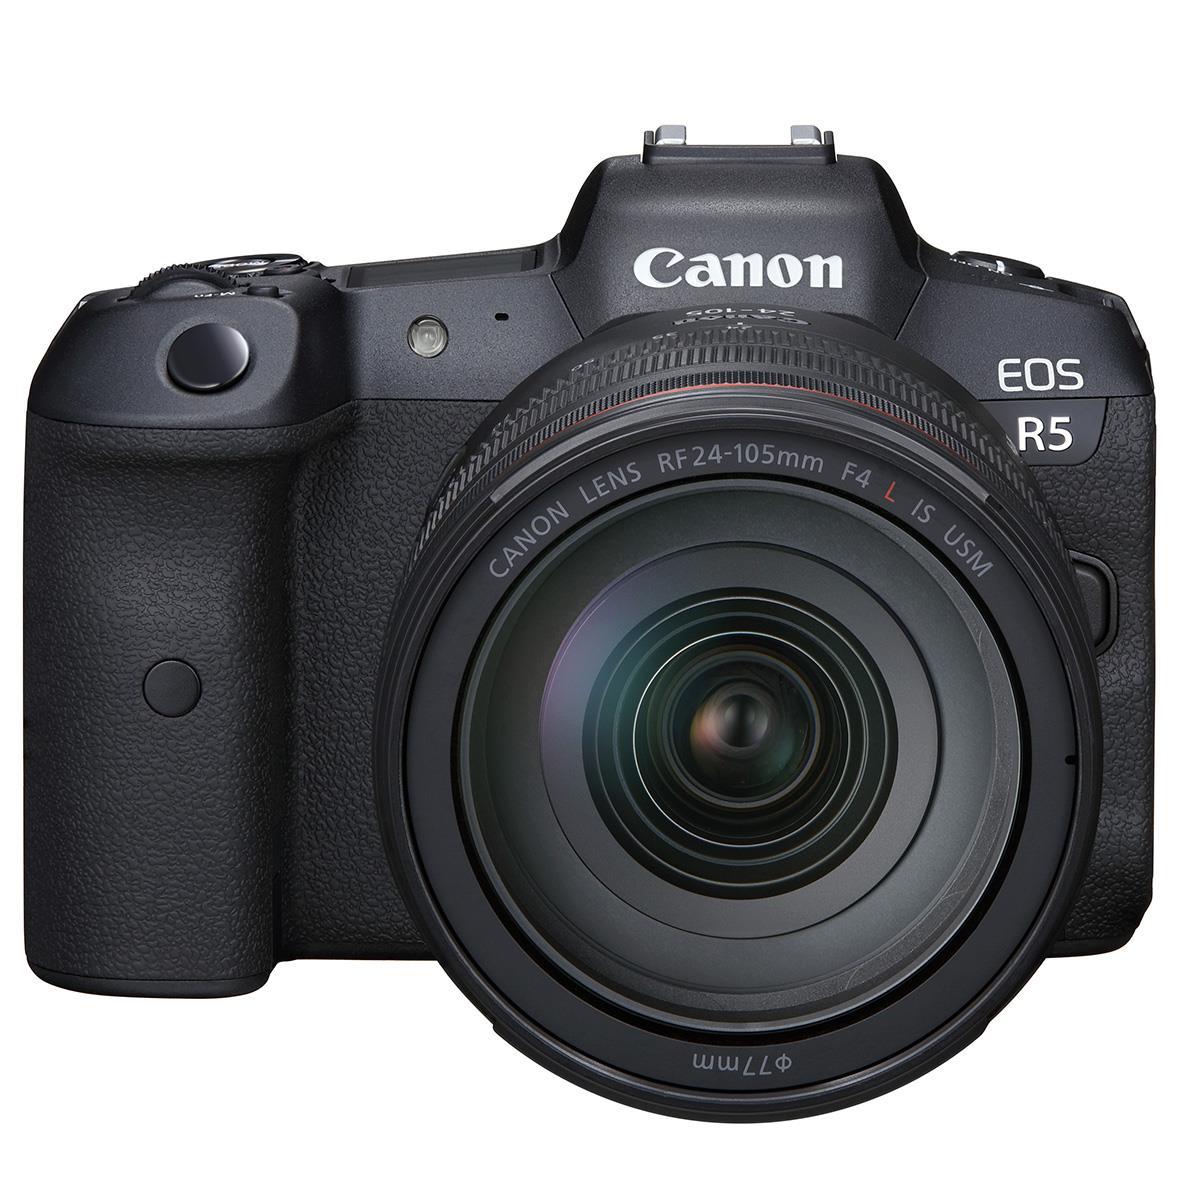 Image of Canon EOS R5 Mirrorless Camera with RF 24-105mm f/4 L IS USM Lens